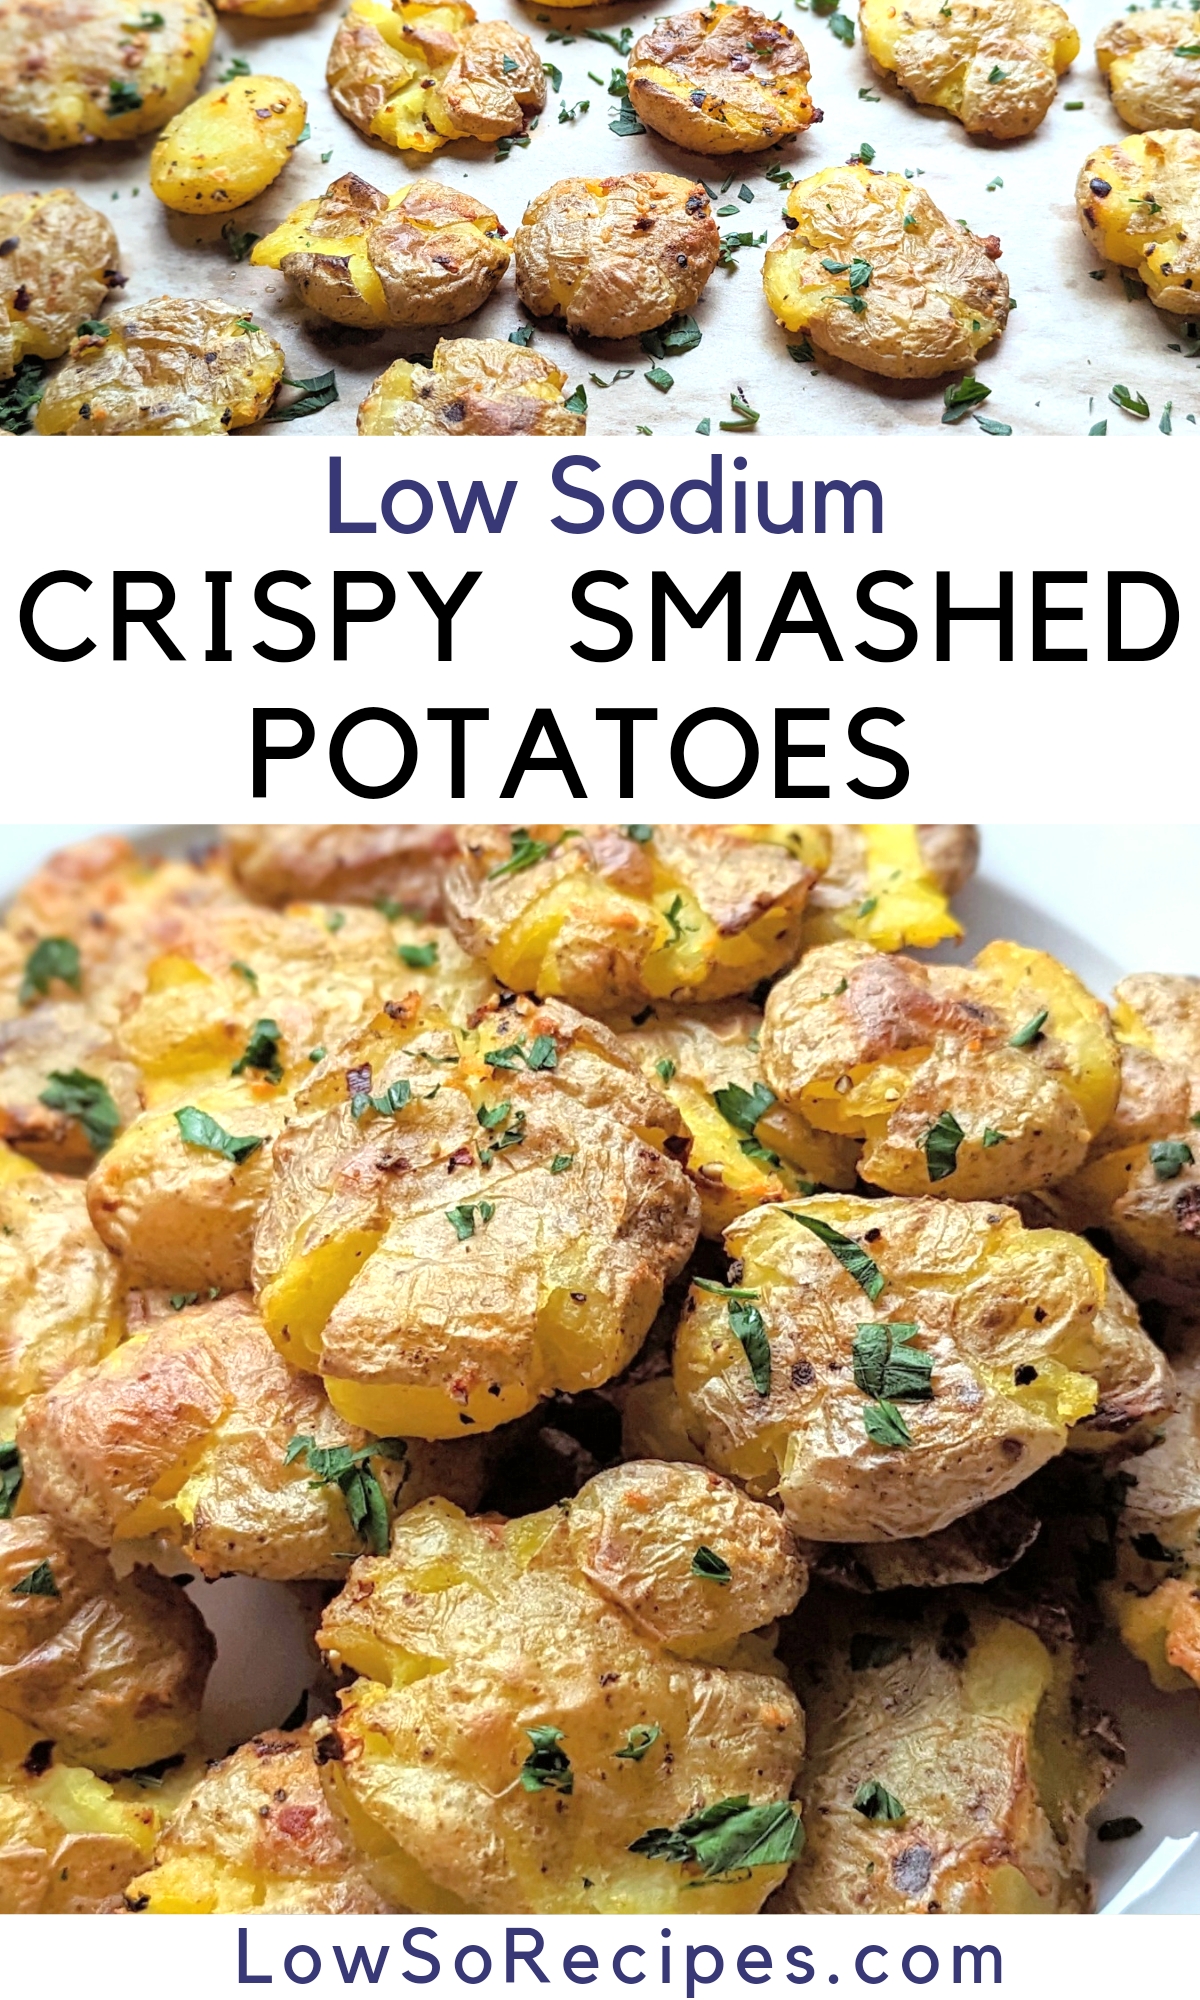 unsalted potato recipes low sodium crispy potatoes with parsley lemon garlic and red chili flakes